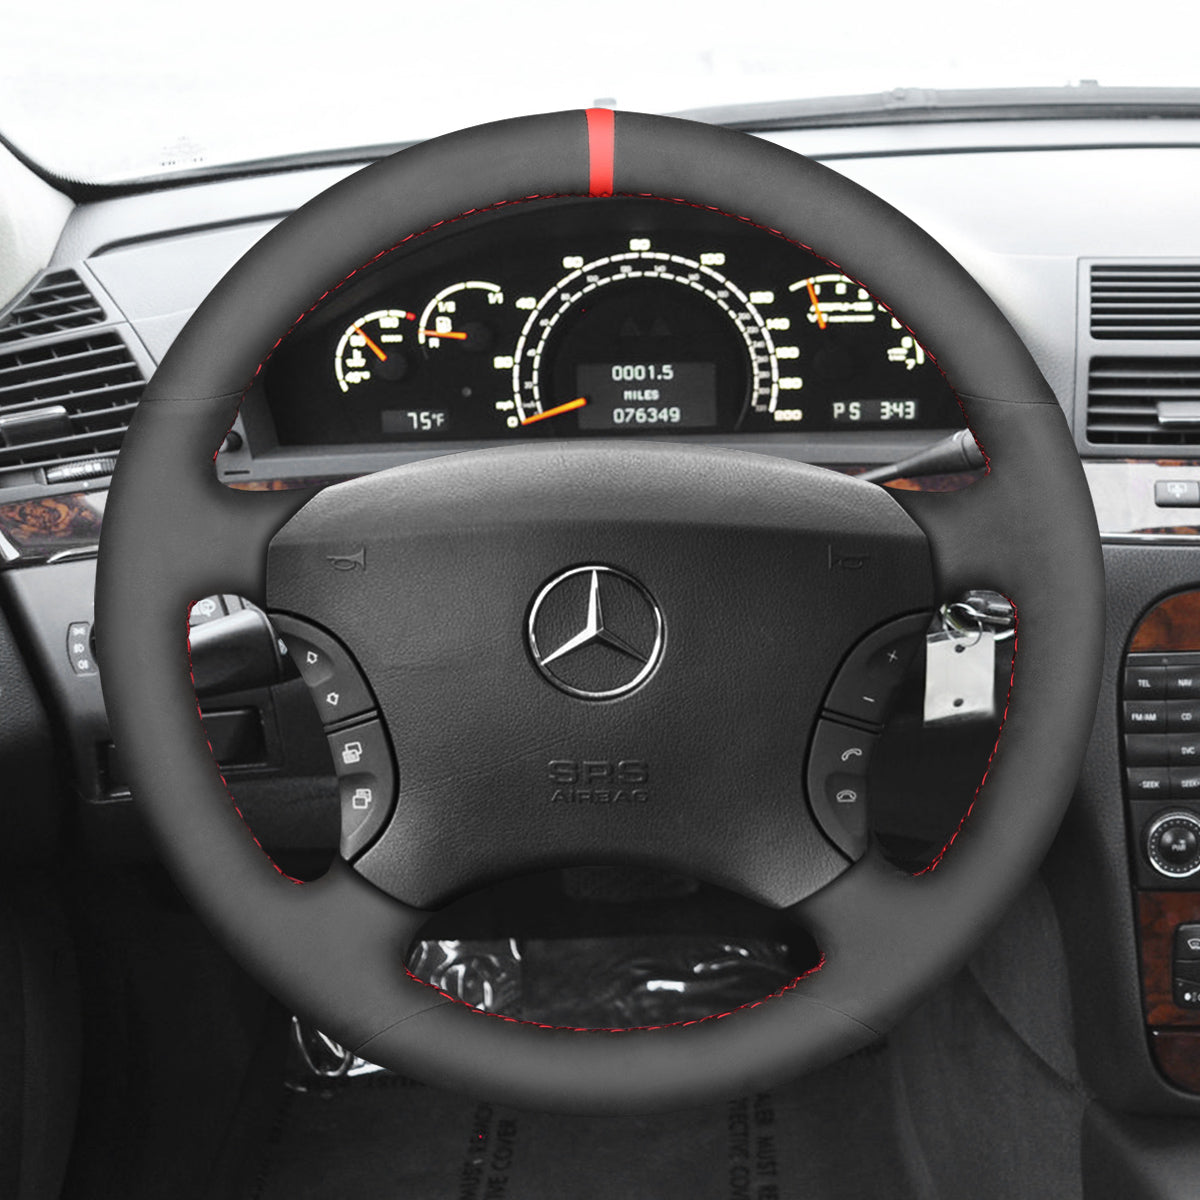 MEWANT Black Leather Suede Car Steering Wheel Cover for Mercedes Benz CL-Class C215 S-Class W220